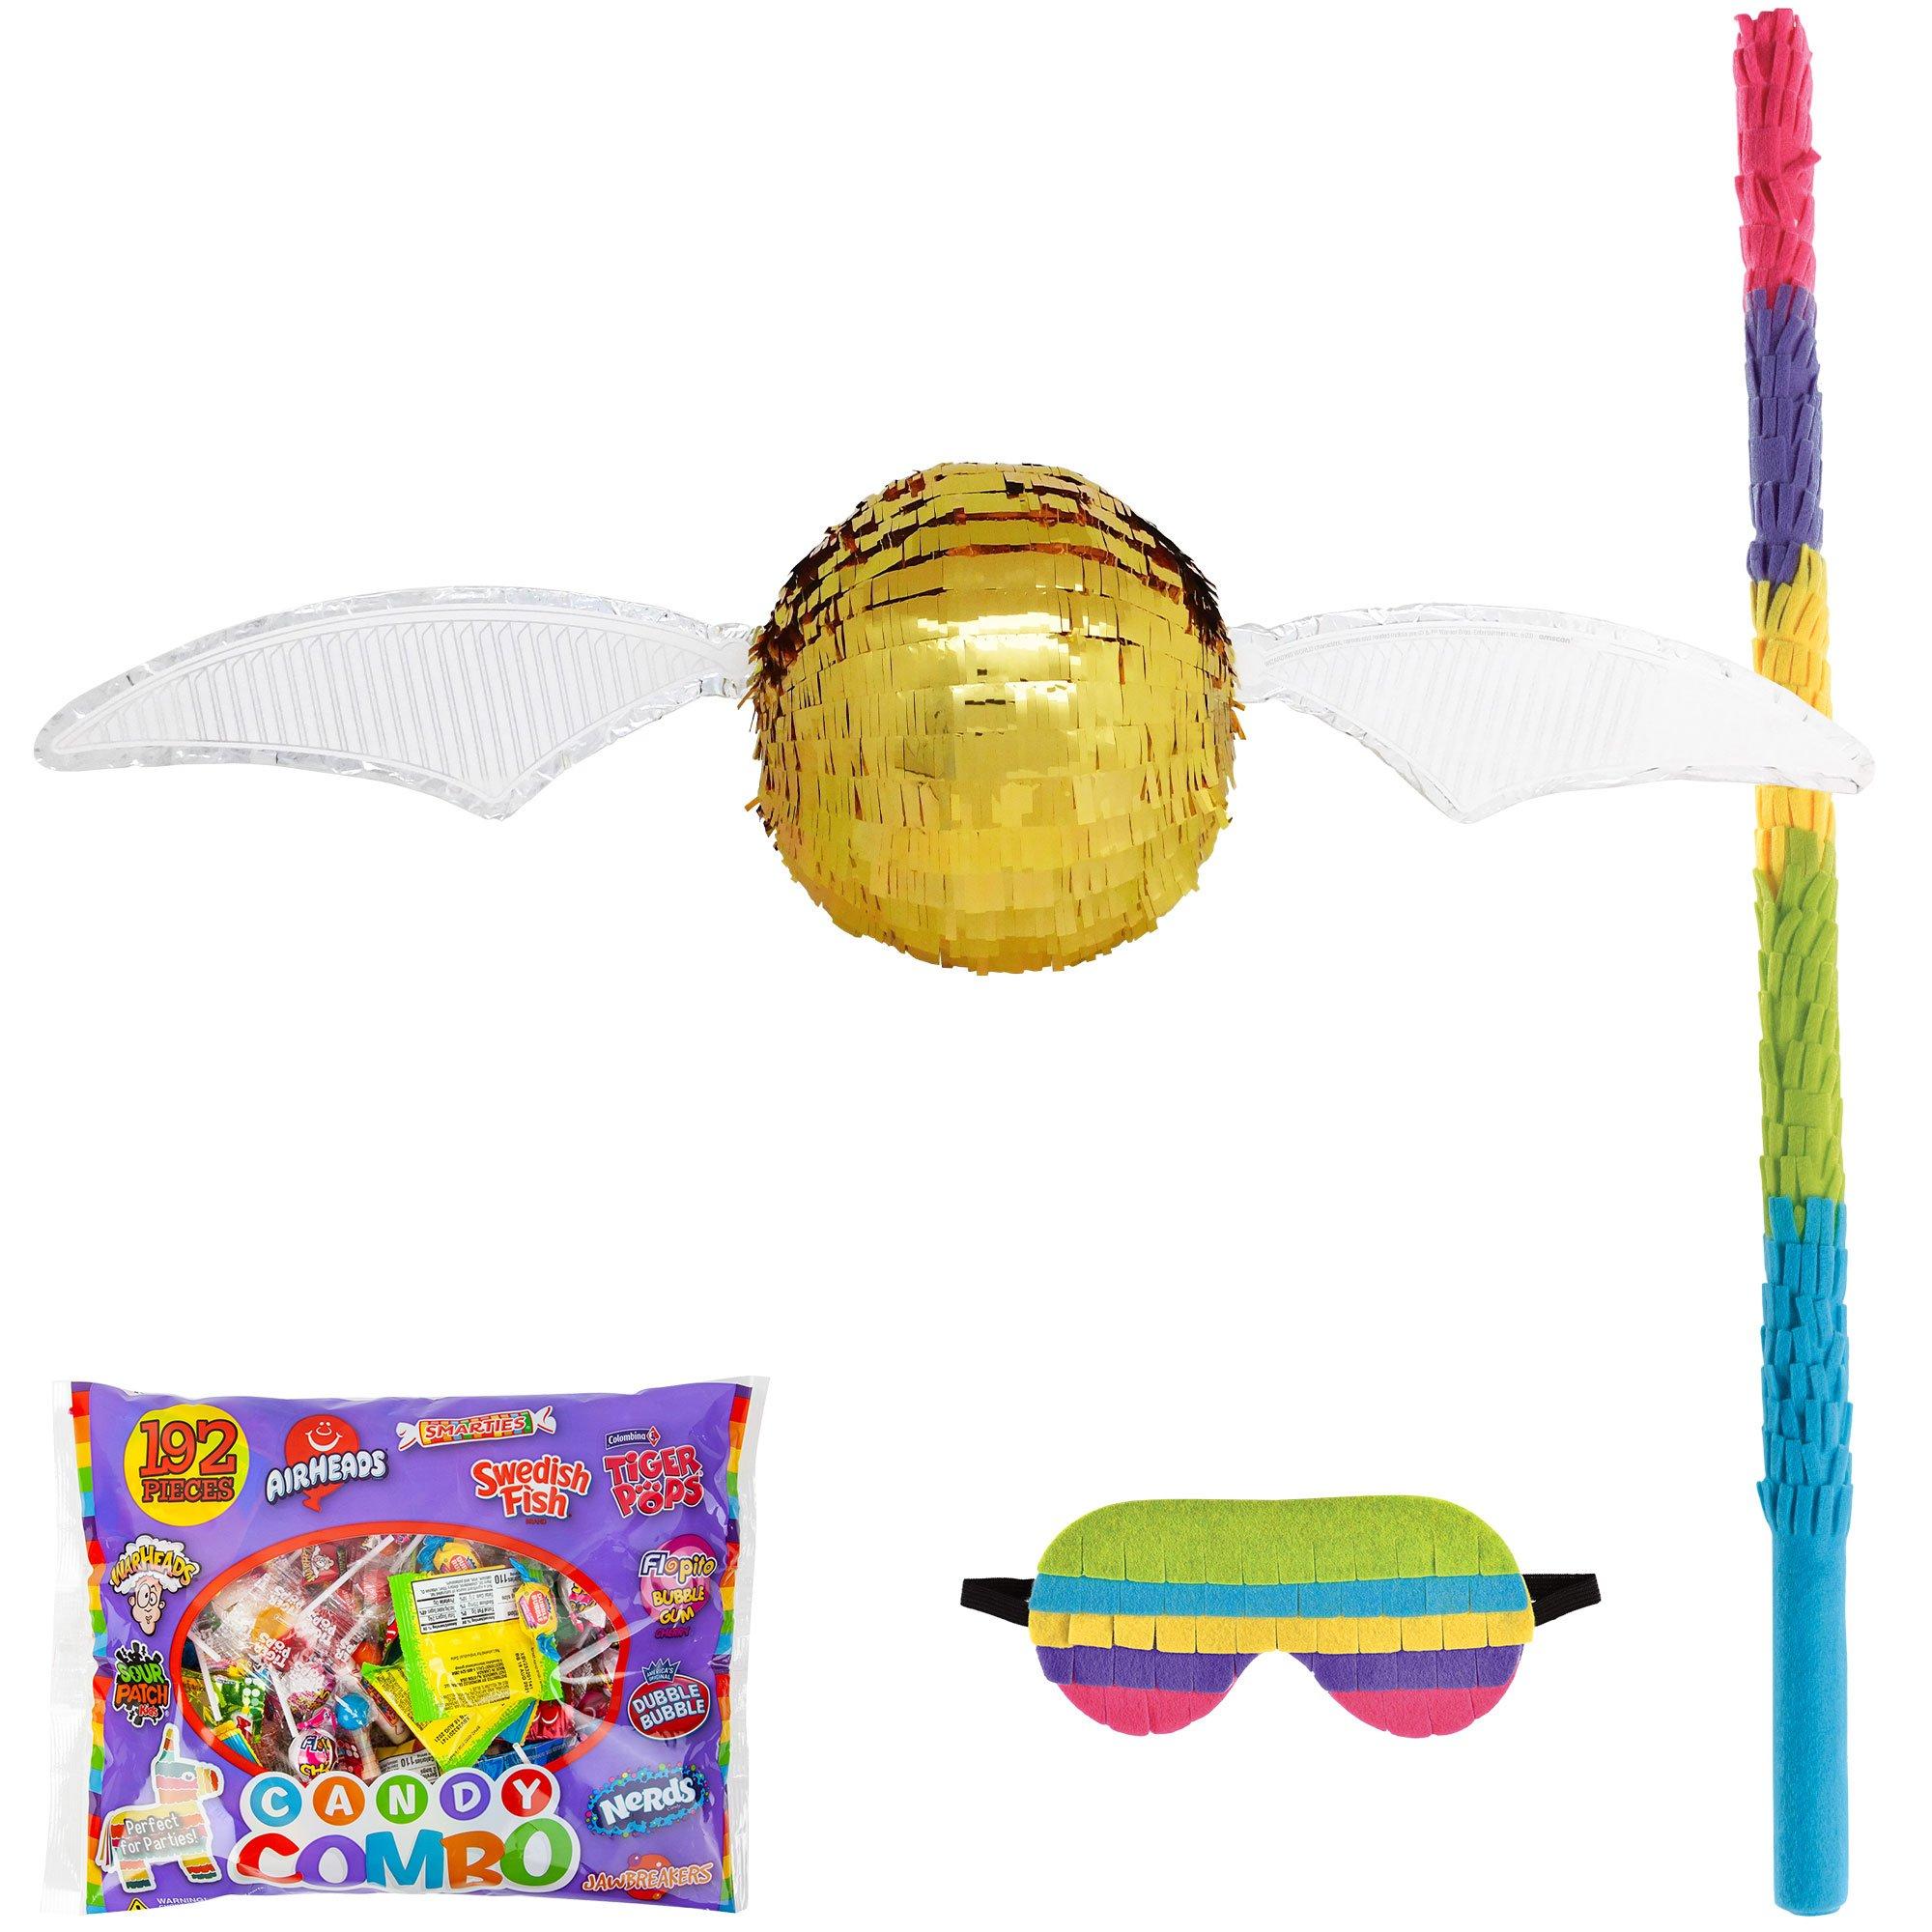 Harry Potter Inspired piñata gold HP birthday girl smash party game kids